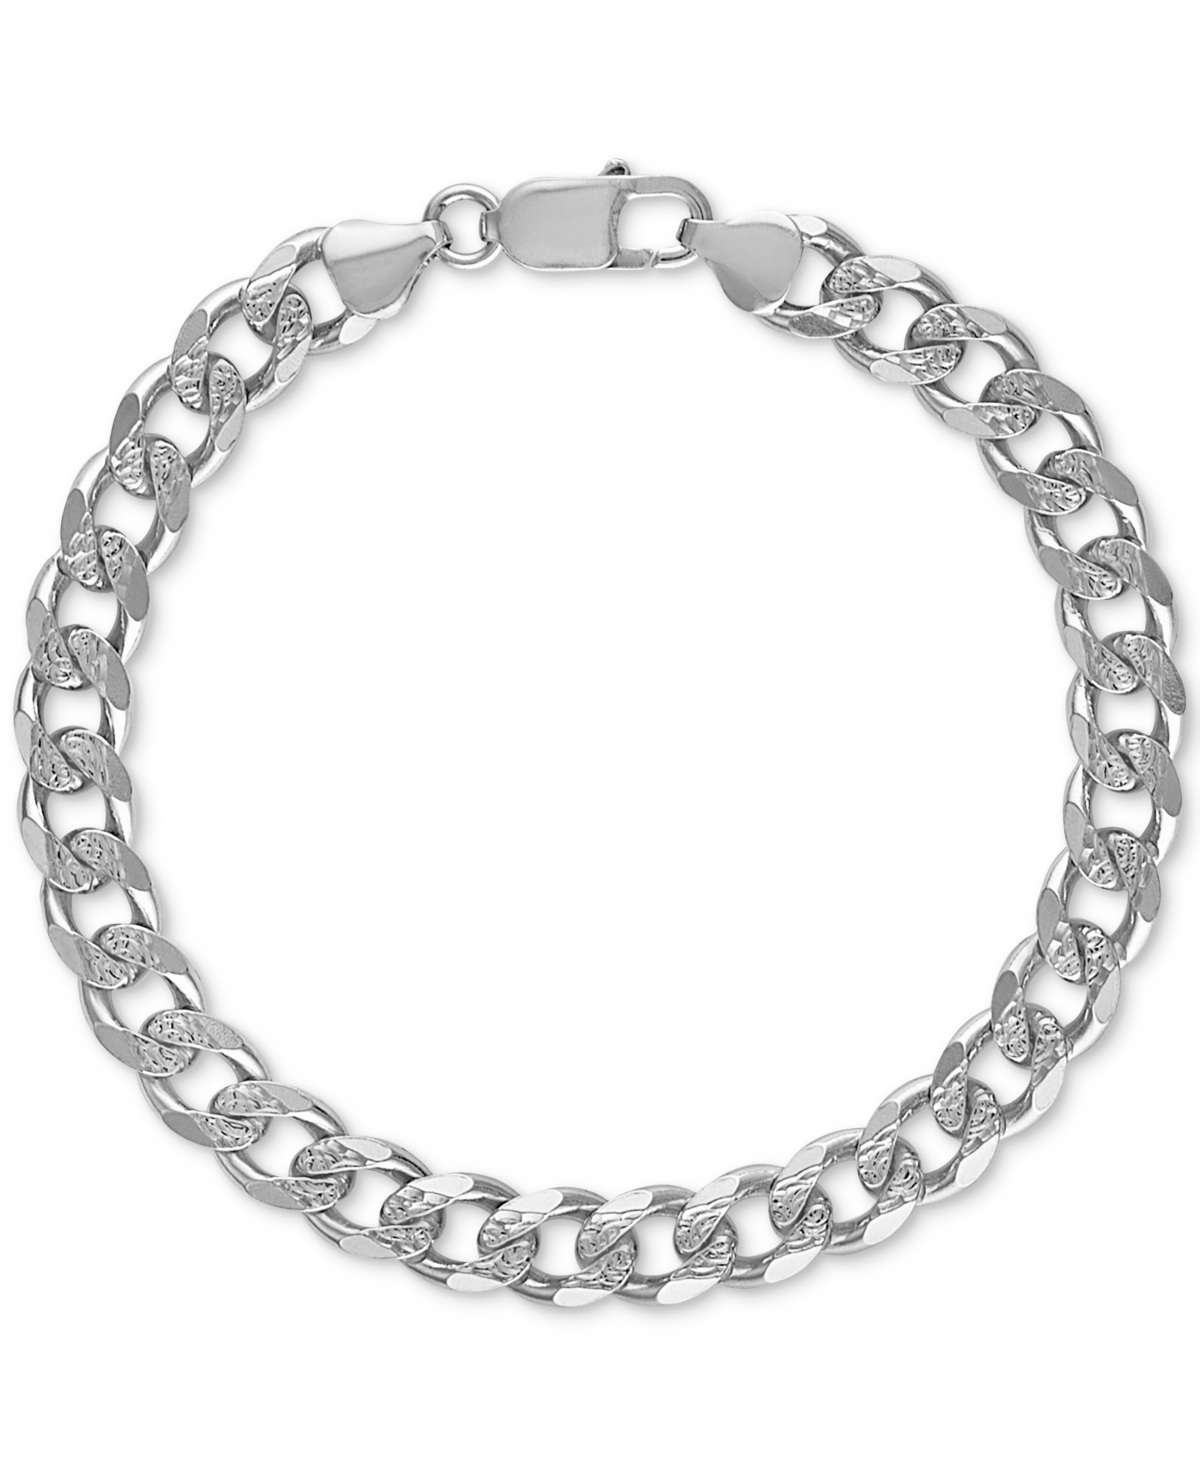 Esquire Men's Jewelry Curb Link Chain Bracelet In Sterling Silver, Created For Macy's